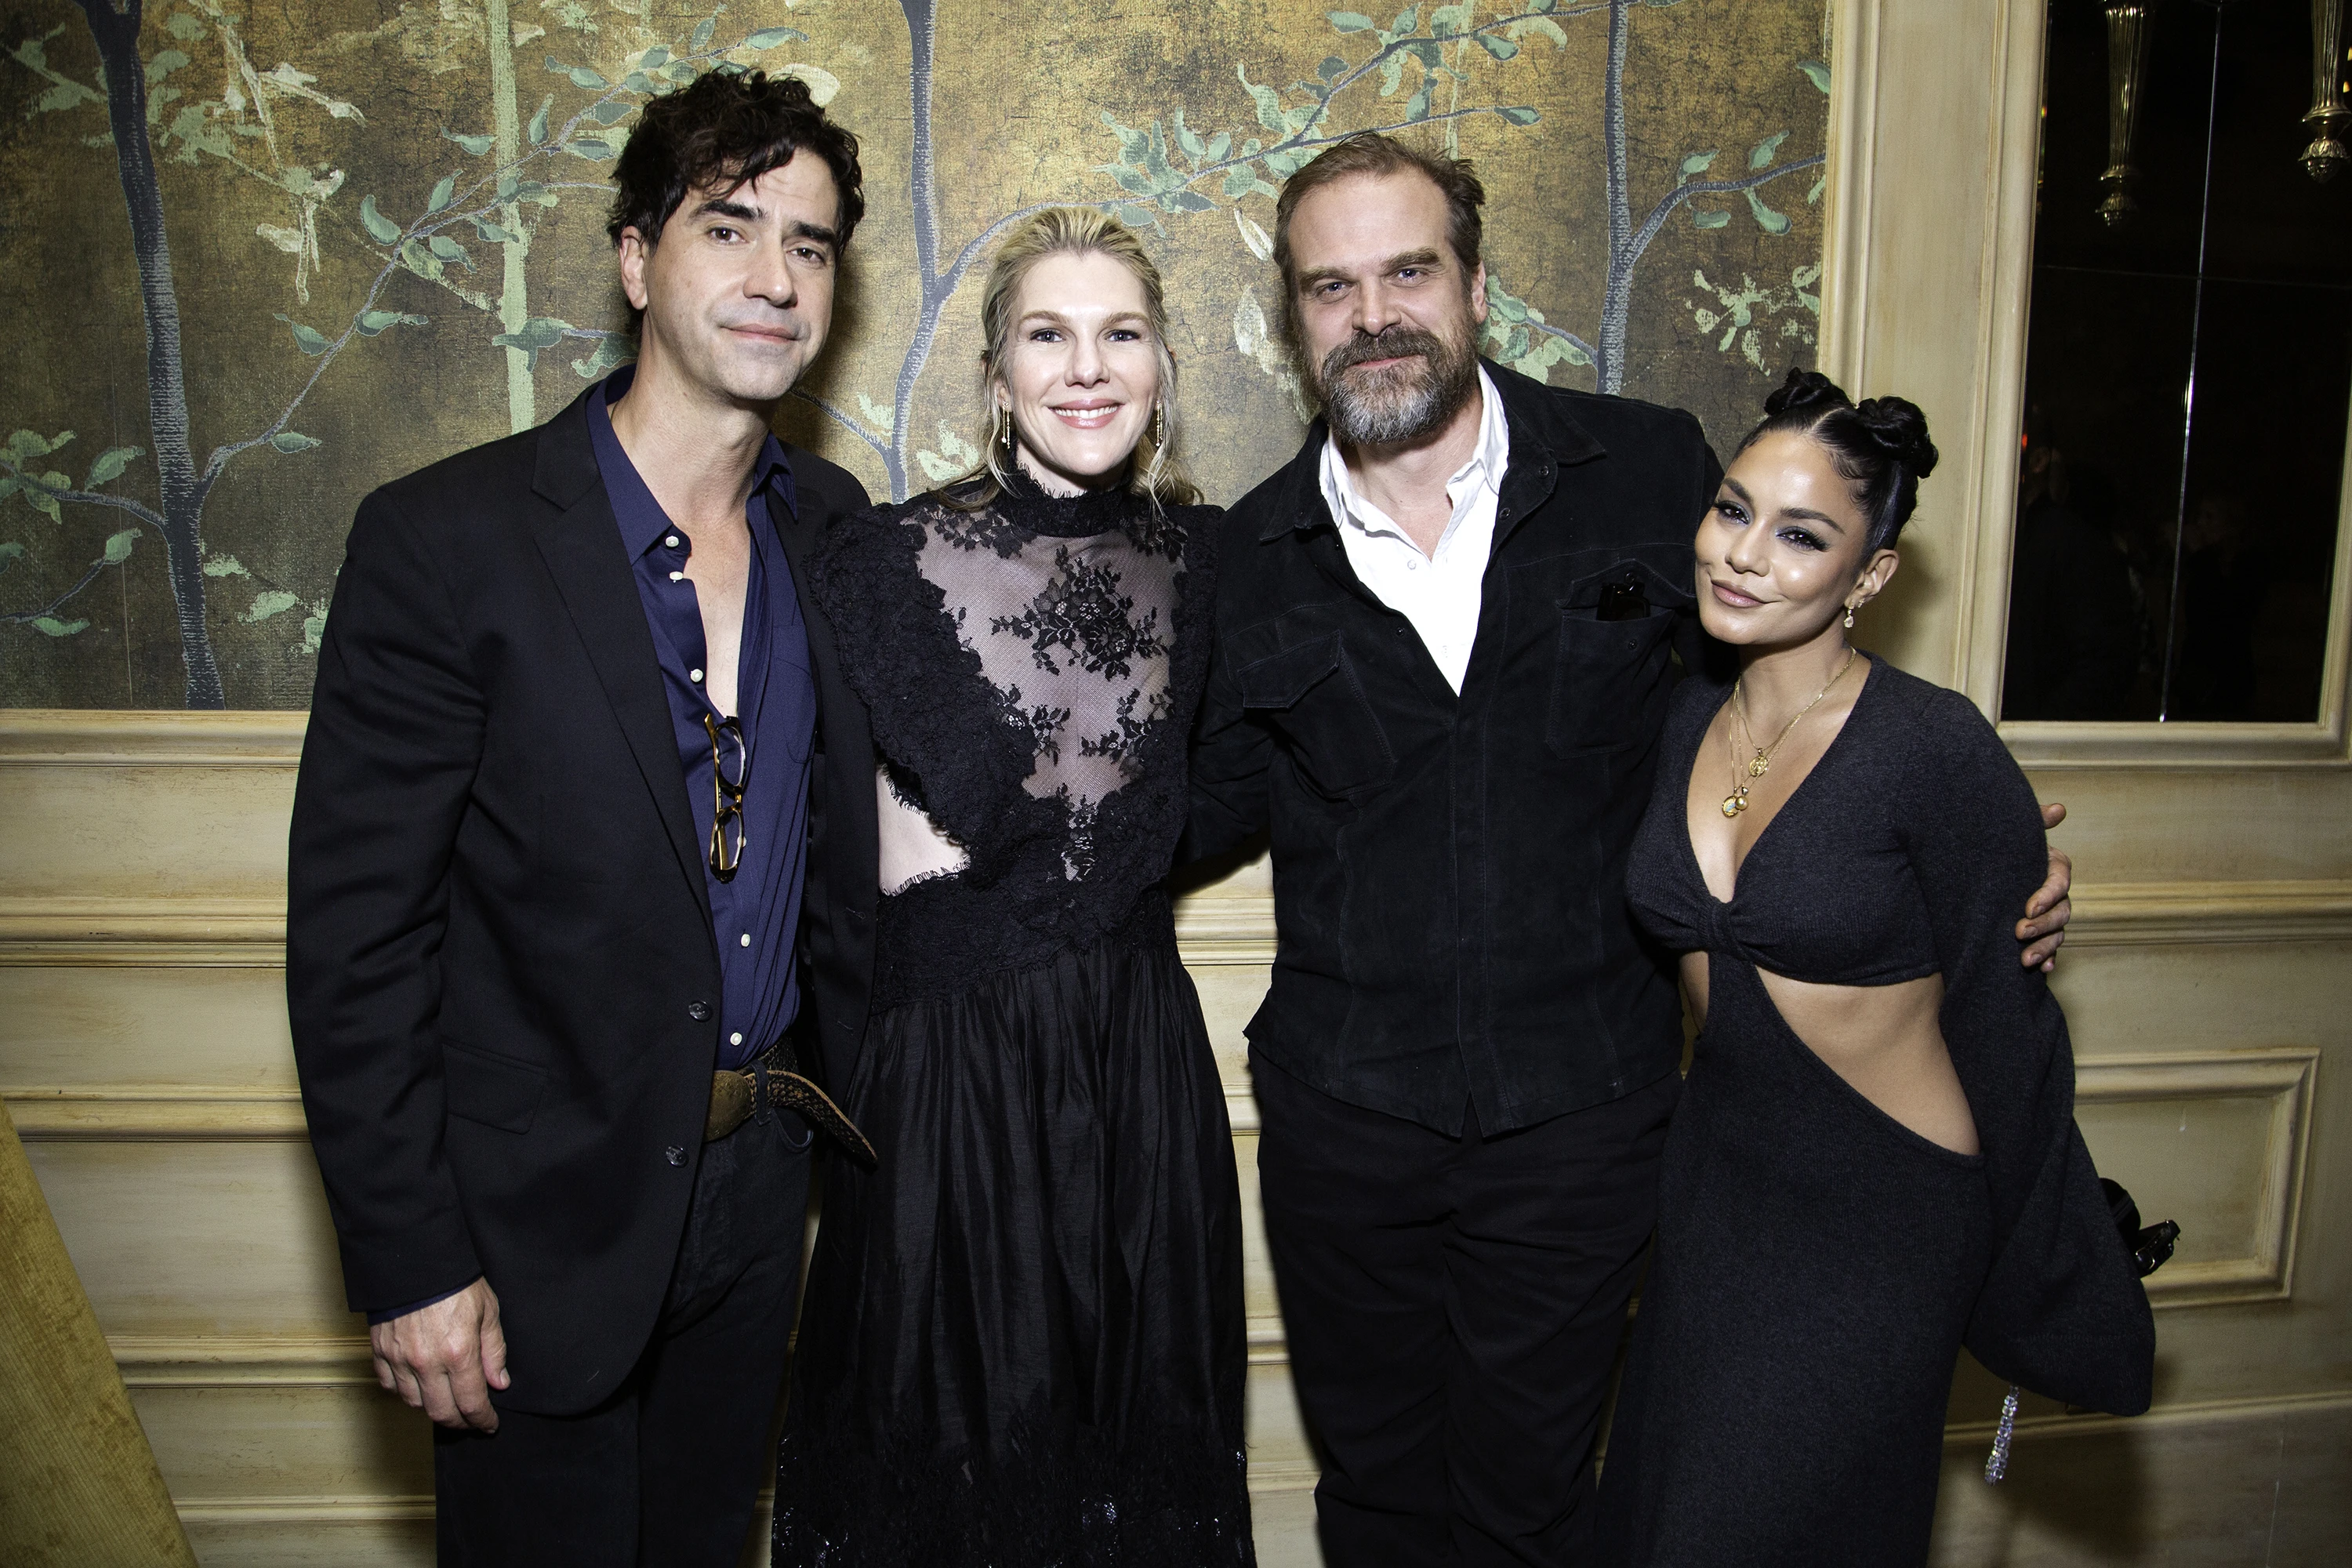 Hamish Linklater, Lily Rabe, David Harbour and Vanessa Hudgens